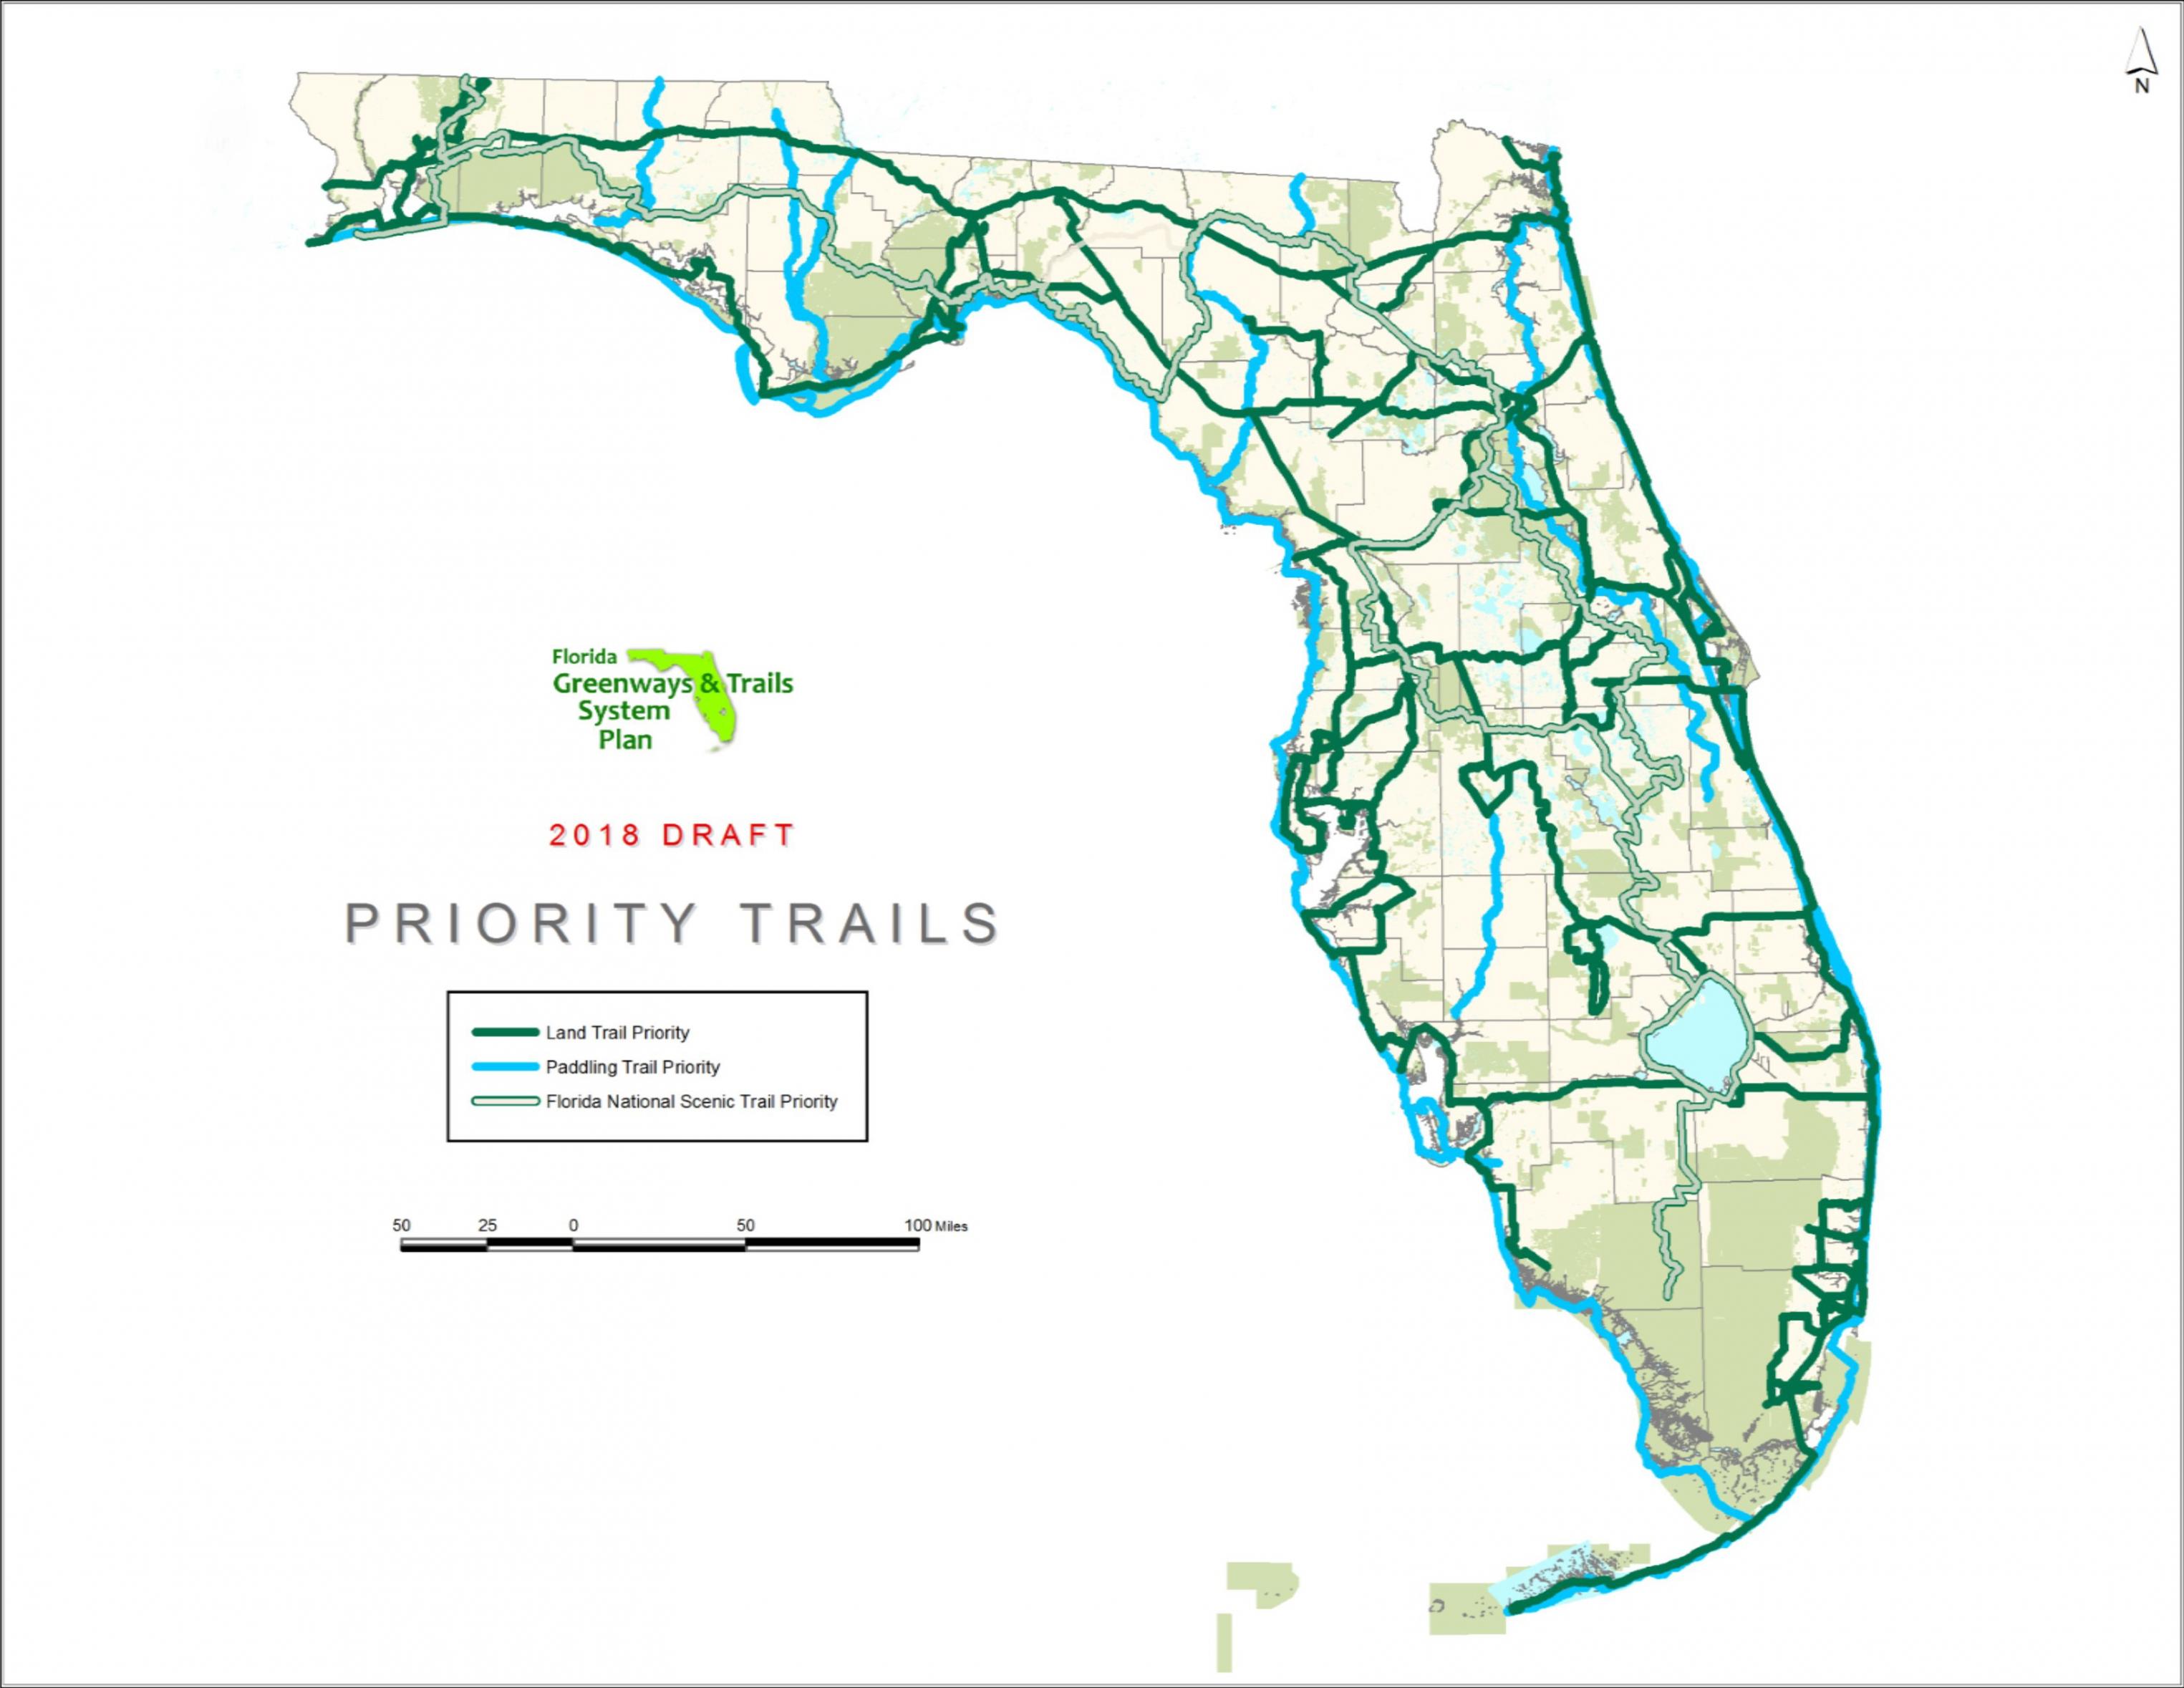 A map of Florida showing the 2018 through 2022 Priority Trails from the updated Florida Greenways and Trails System Plan draft.